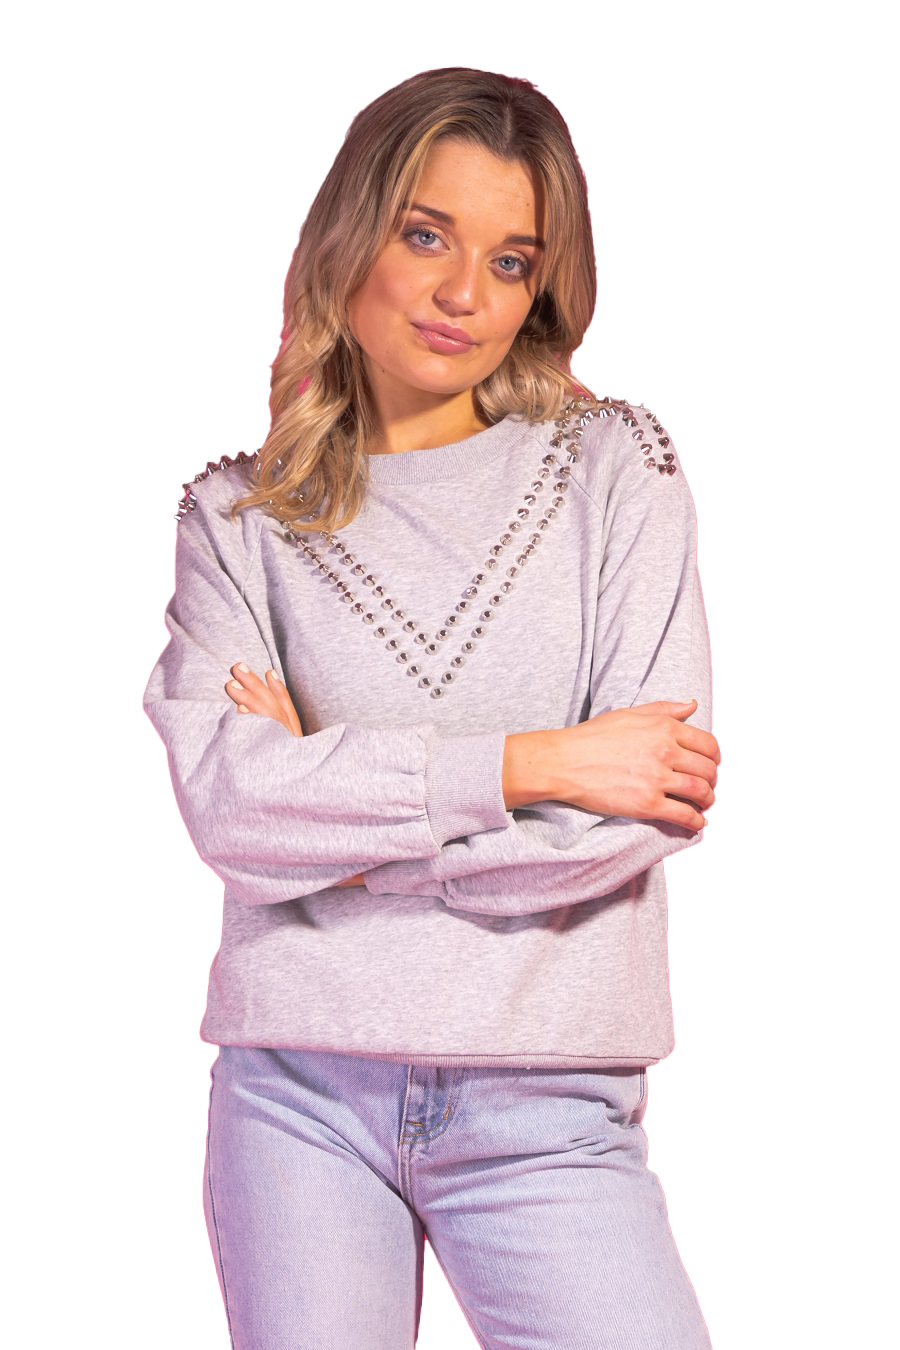 Charlo Lexi Studded Sweater